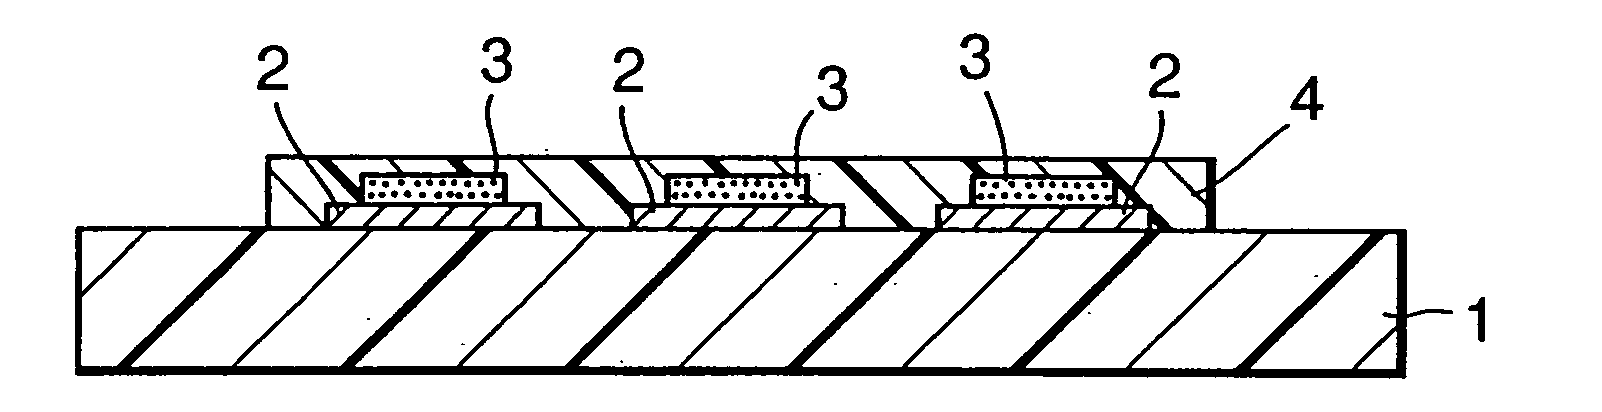 Circuit substrate for packaging semiconductor device, method for producing the same, and method for producing semiconductor device package structure using the same